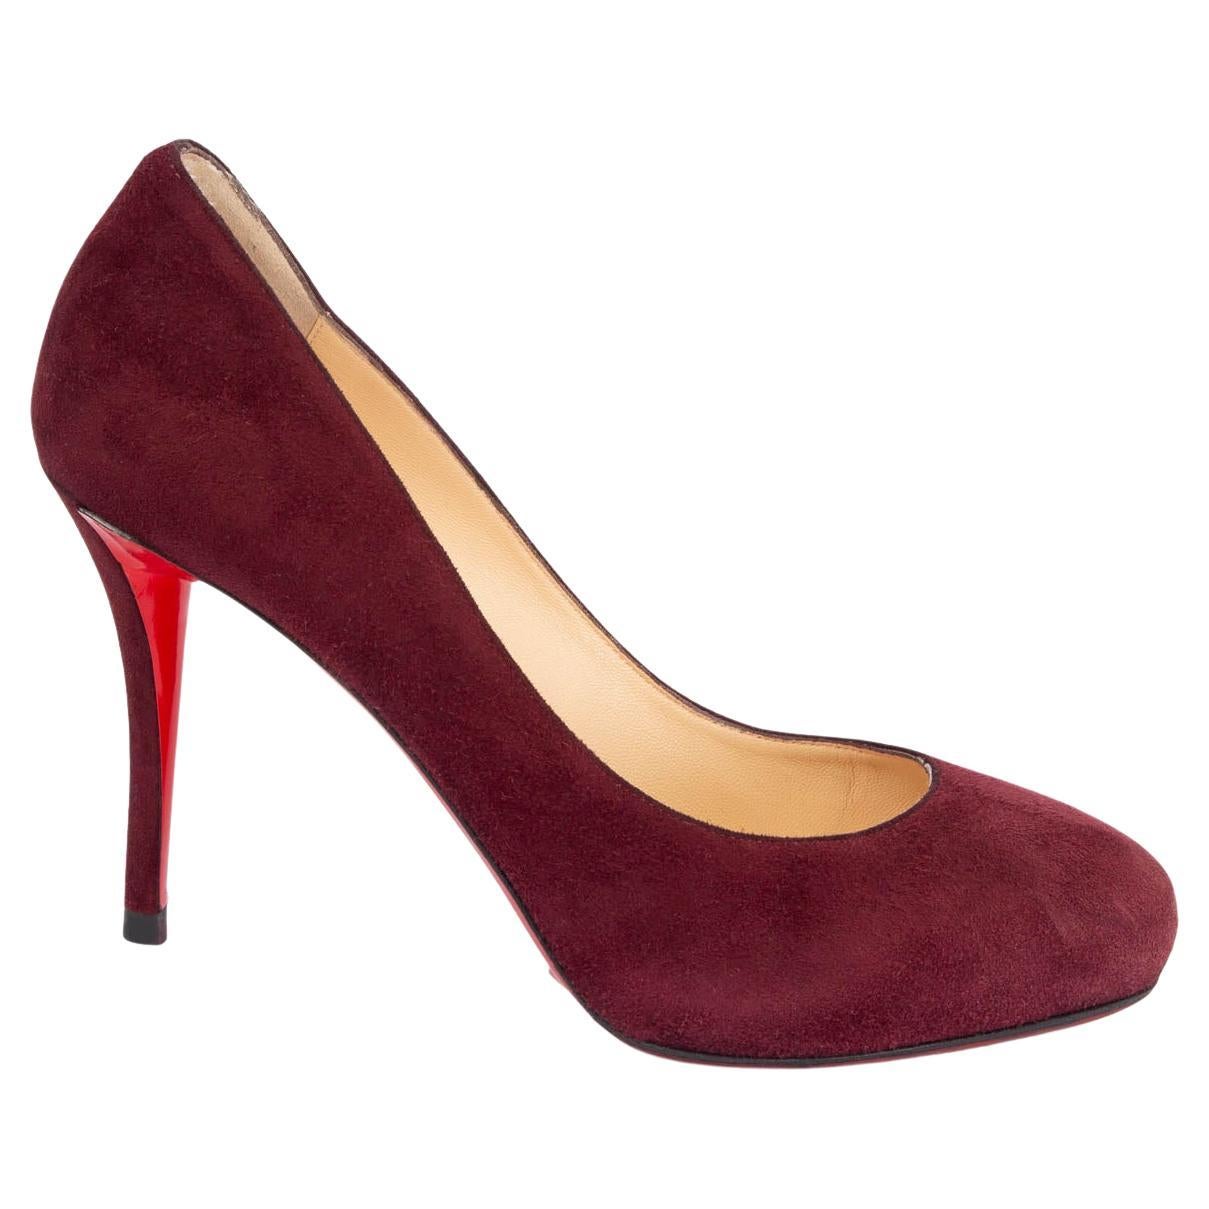 CHRISTIAN LOUBOUTIN burgundy suede SIMPLE 100 Pumps Shoes 38.5 For Sale